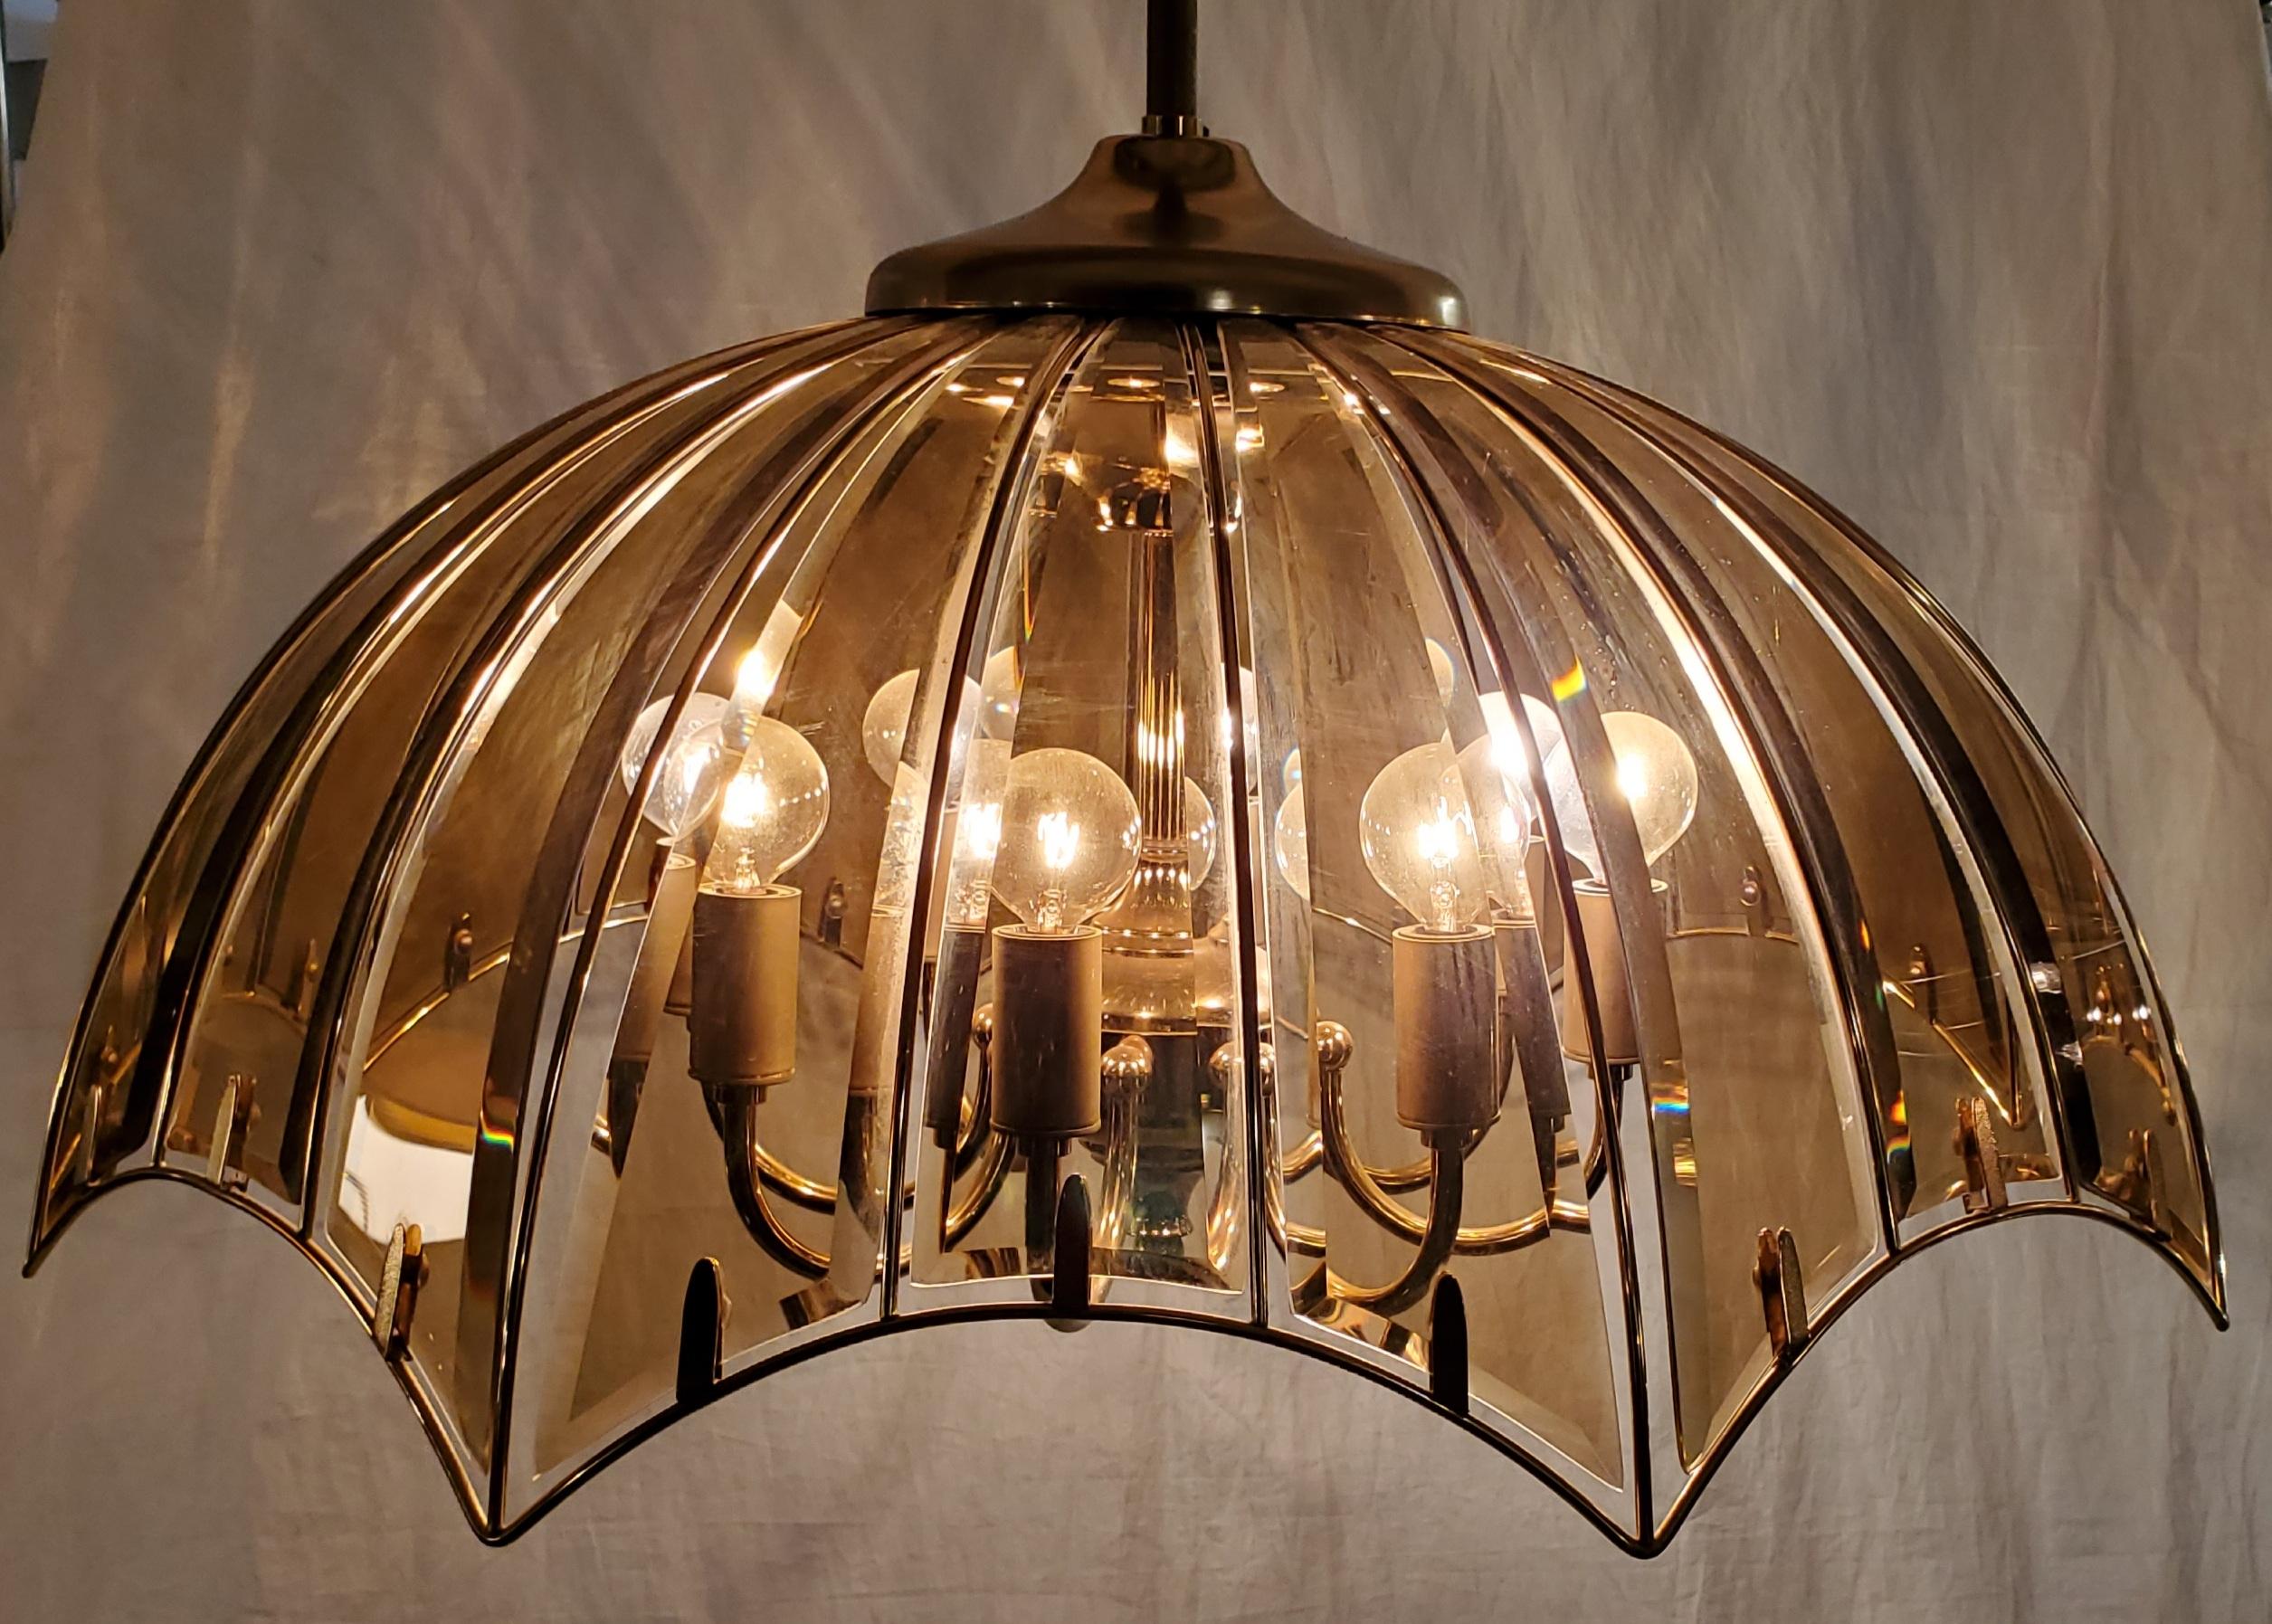 Stunning Mid Century modern Fredrick Ramond styled umbrella chandelier.
The beveled curved glass has a small tint and the outline is a golden metal. This chandelier has 8 lights.